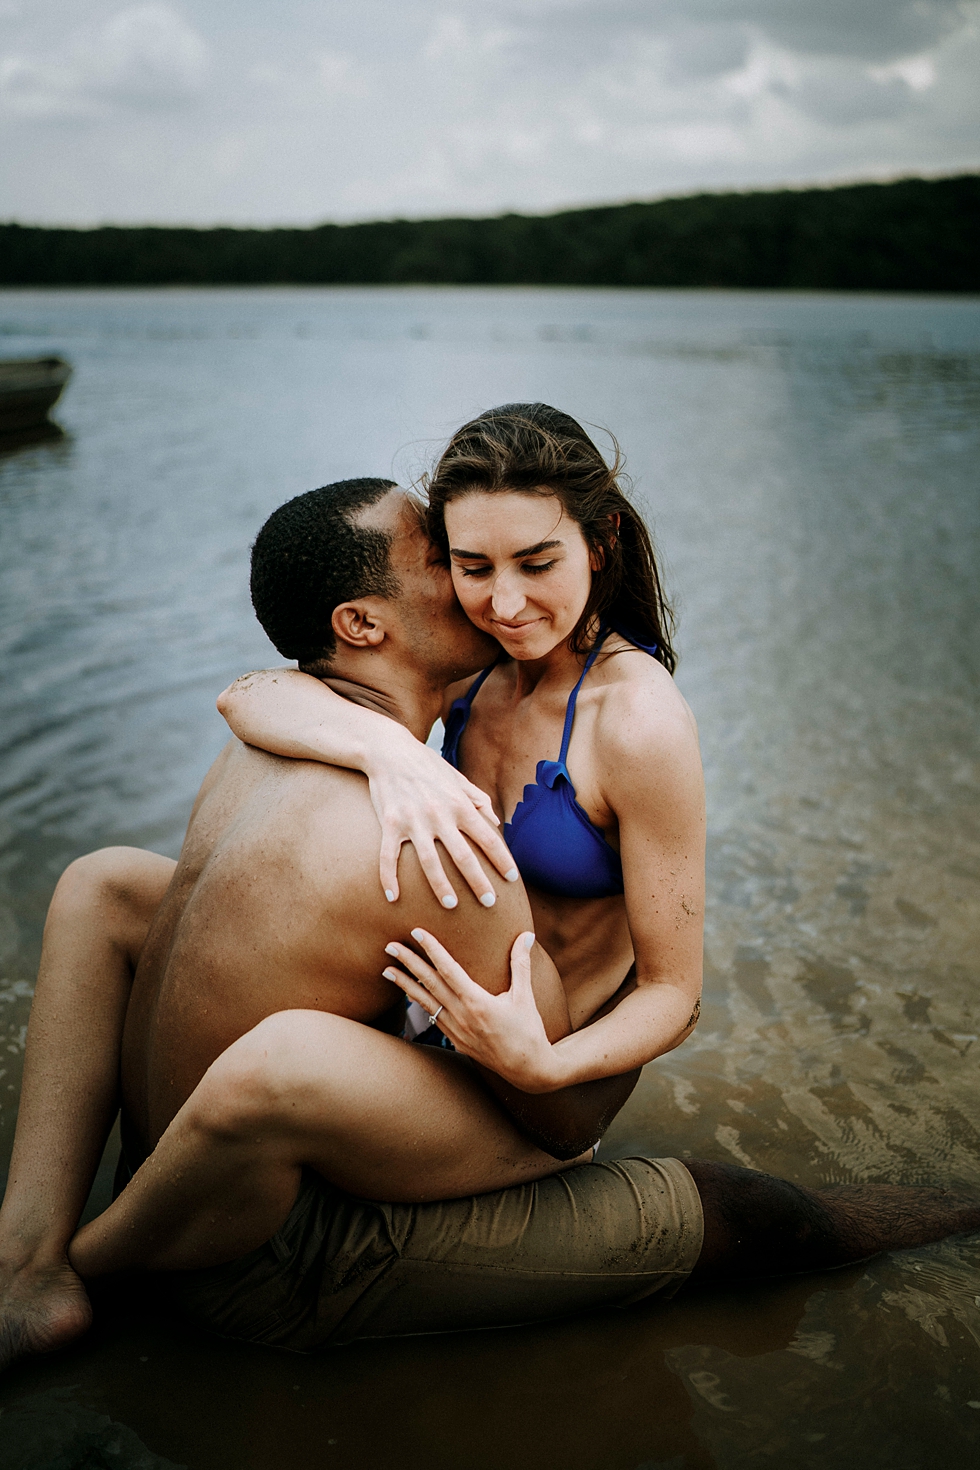  engagement session in deams lake with swim suits couple kiss engagement ring #engagementphotographer #louisvilleengagementphotographer #kentuckyengagmentphotographer #kentuckyengagments #engagementshoot #loveisintheair 